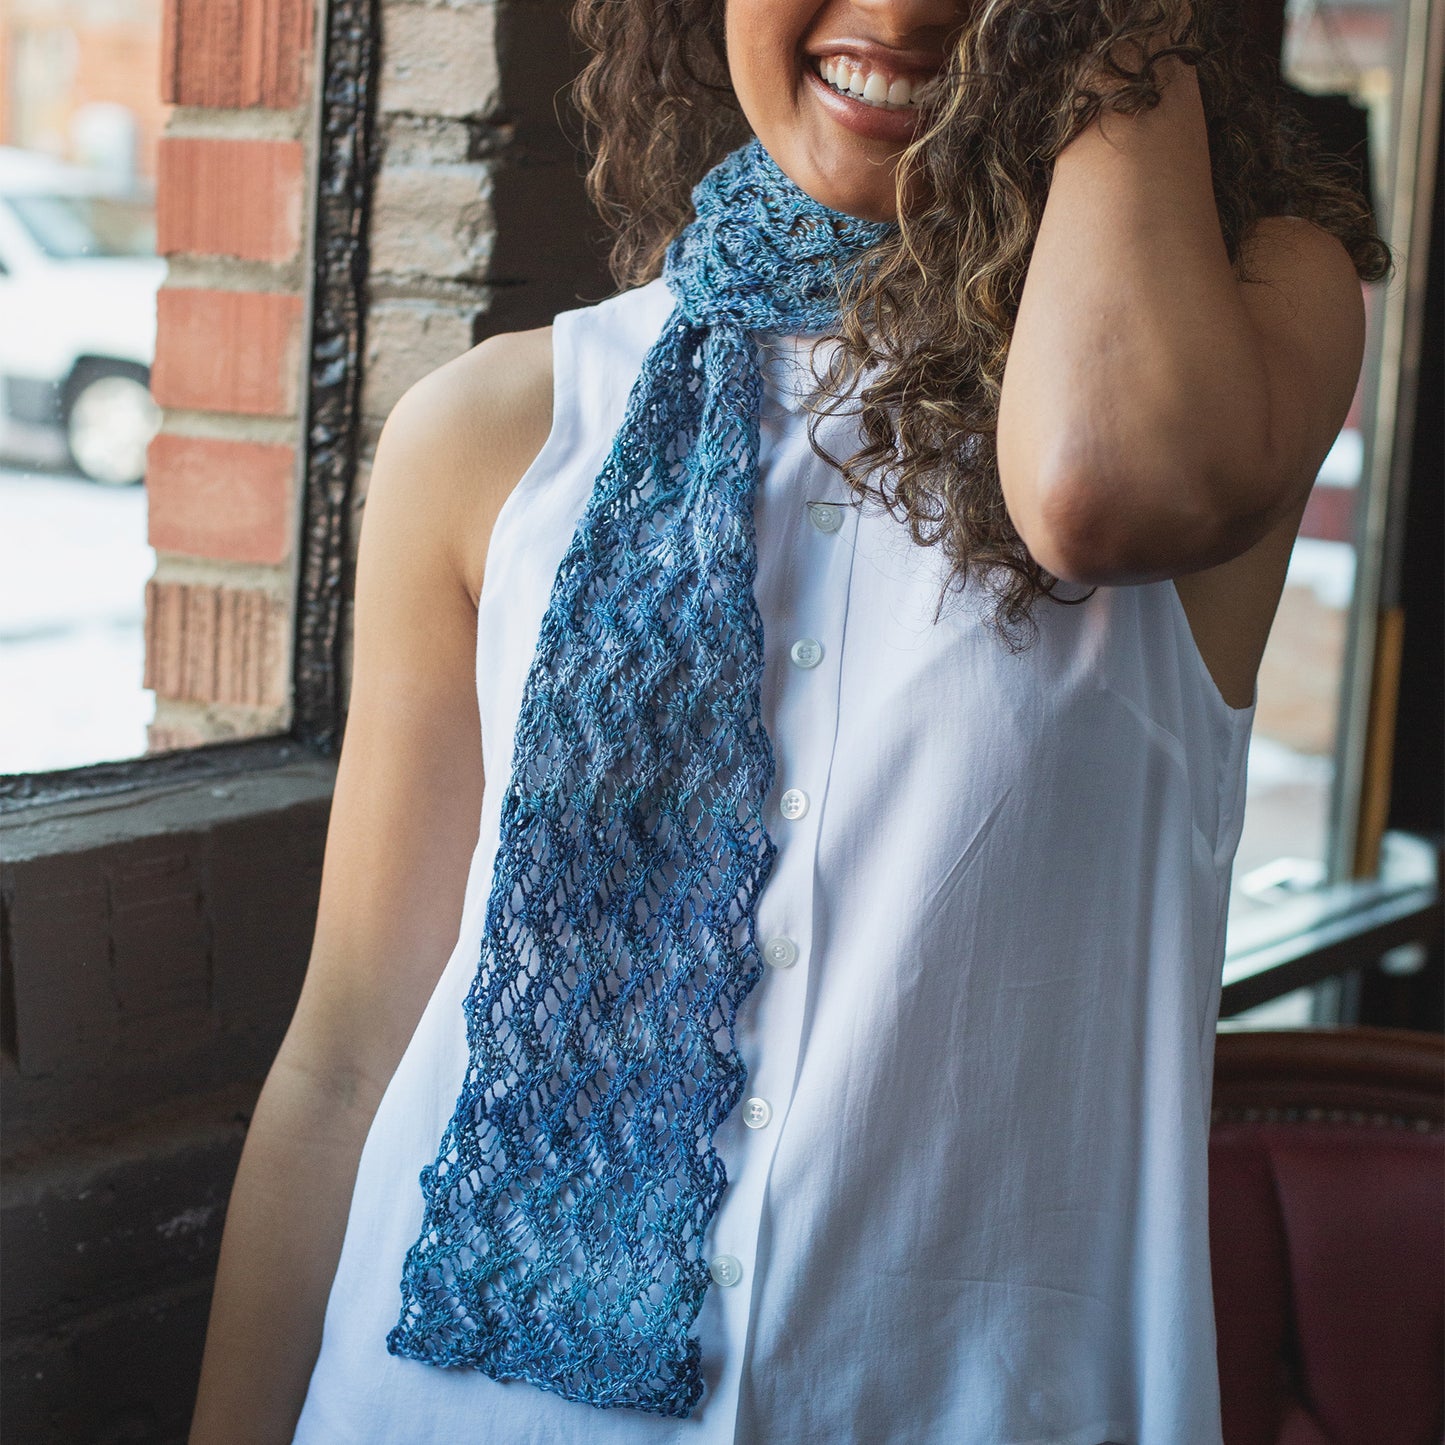 Lovely Lace: 6 Projects to Spin and Knit eBook